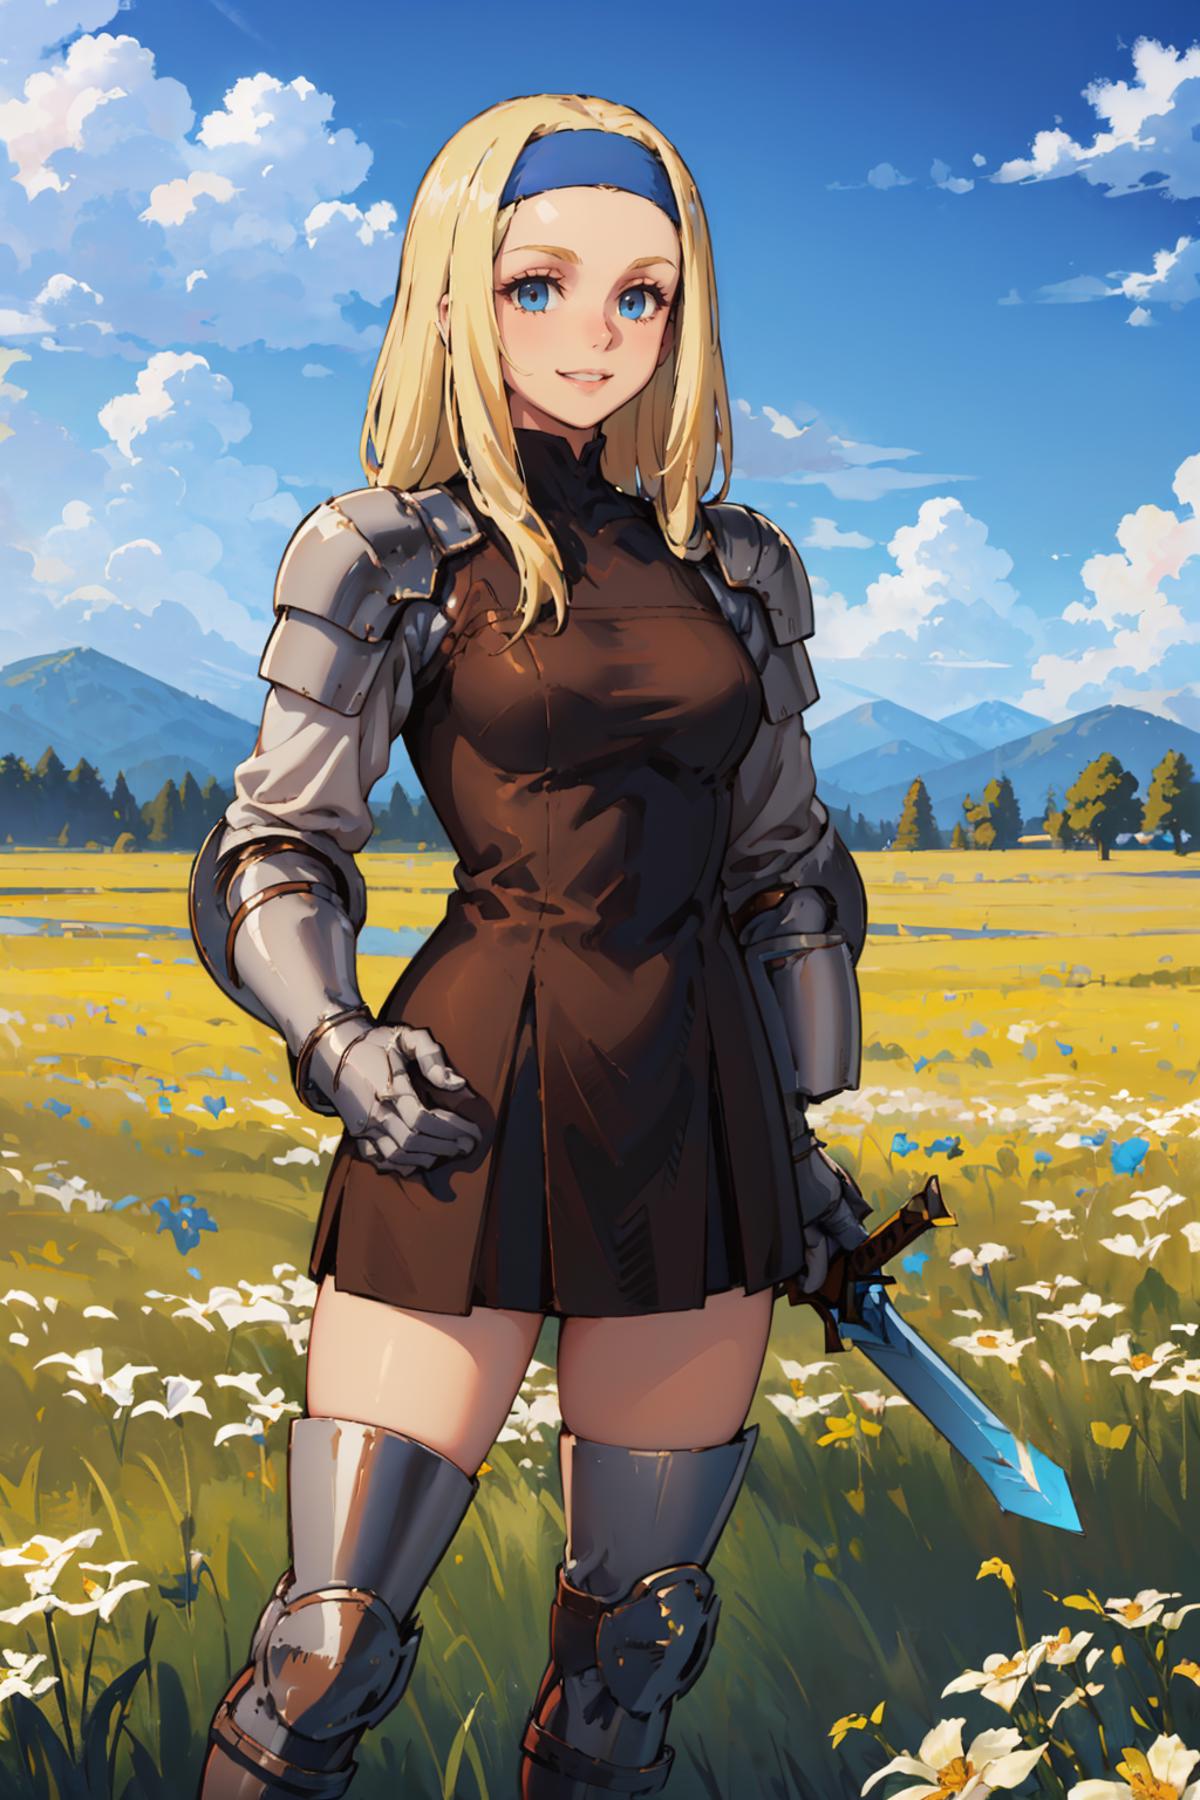 Female Squire (Final Fantasy Tactics) image by novowels